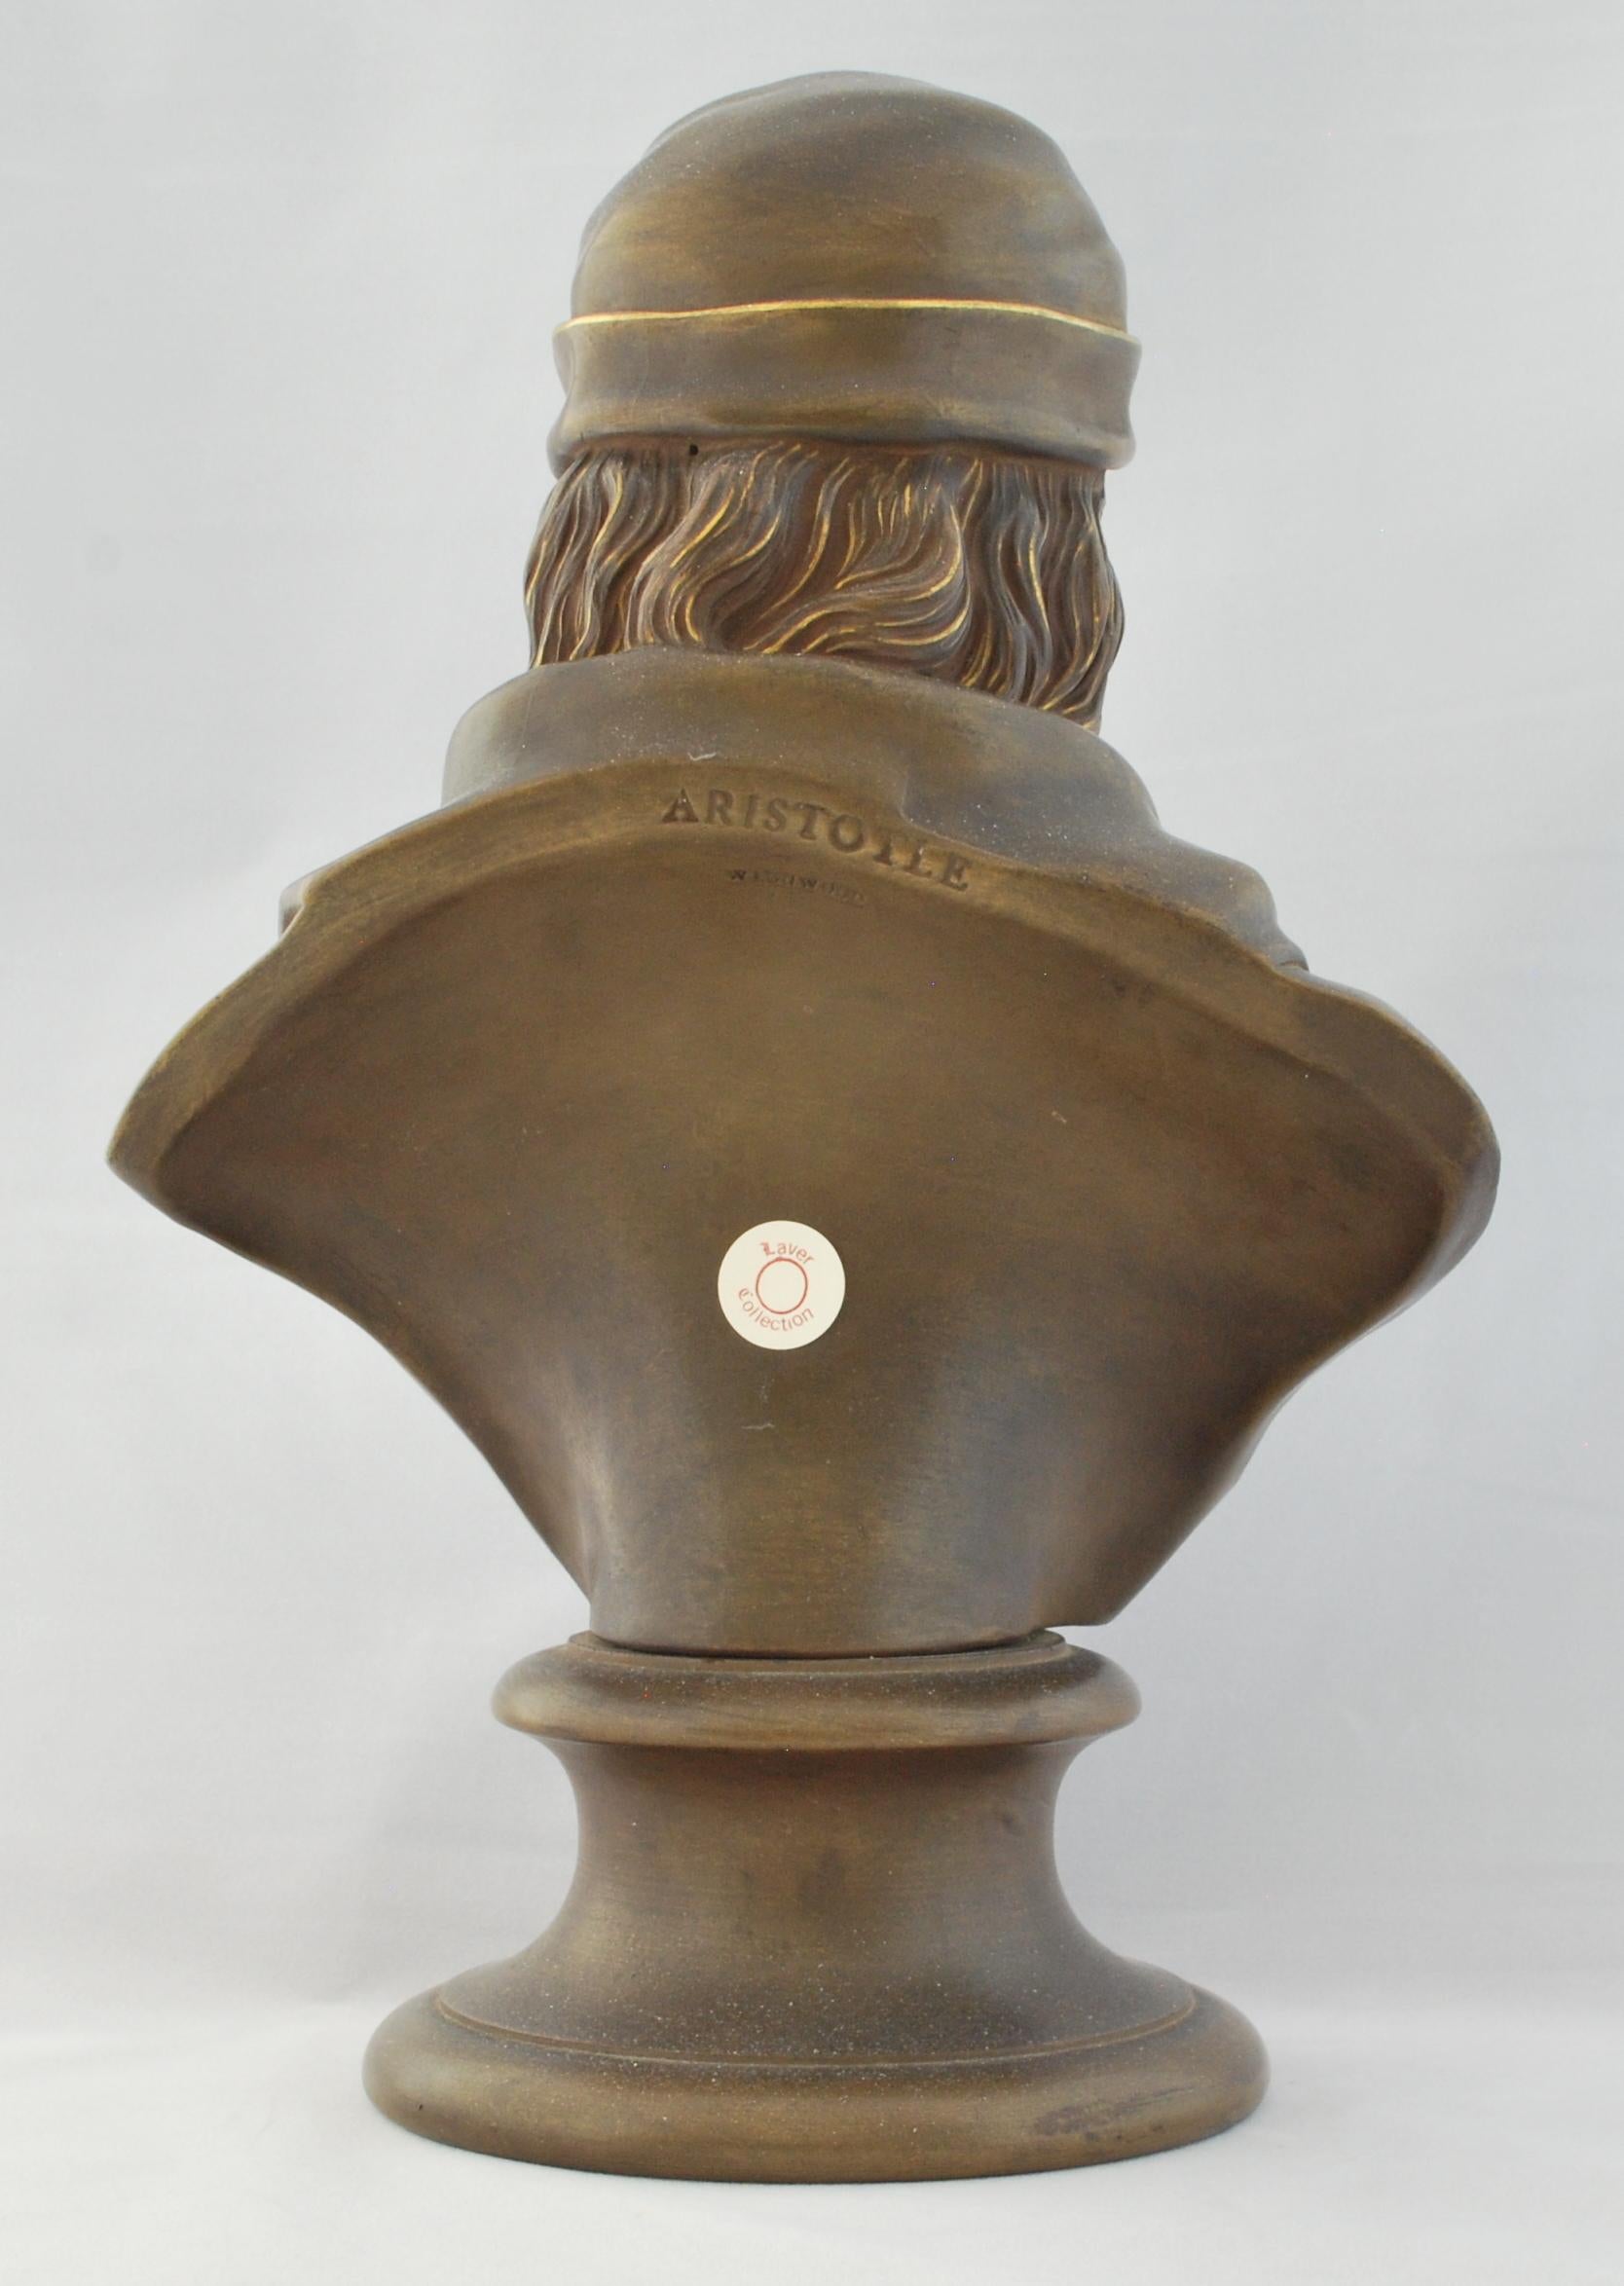 Neoclassical Revival Basalt Bust, Gilt and Bronzed, of Aristotle, Wedgwood, 1880